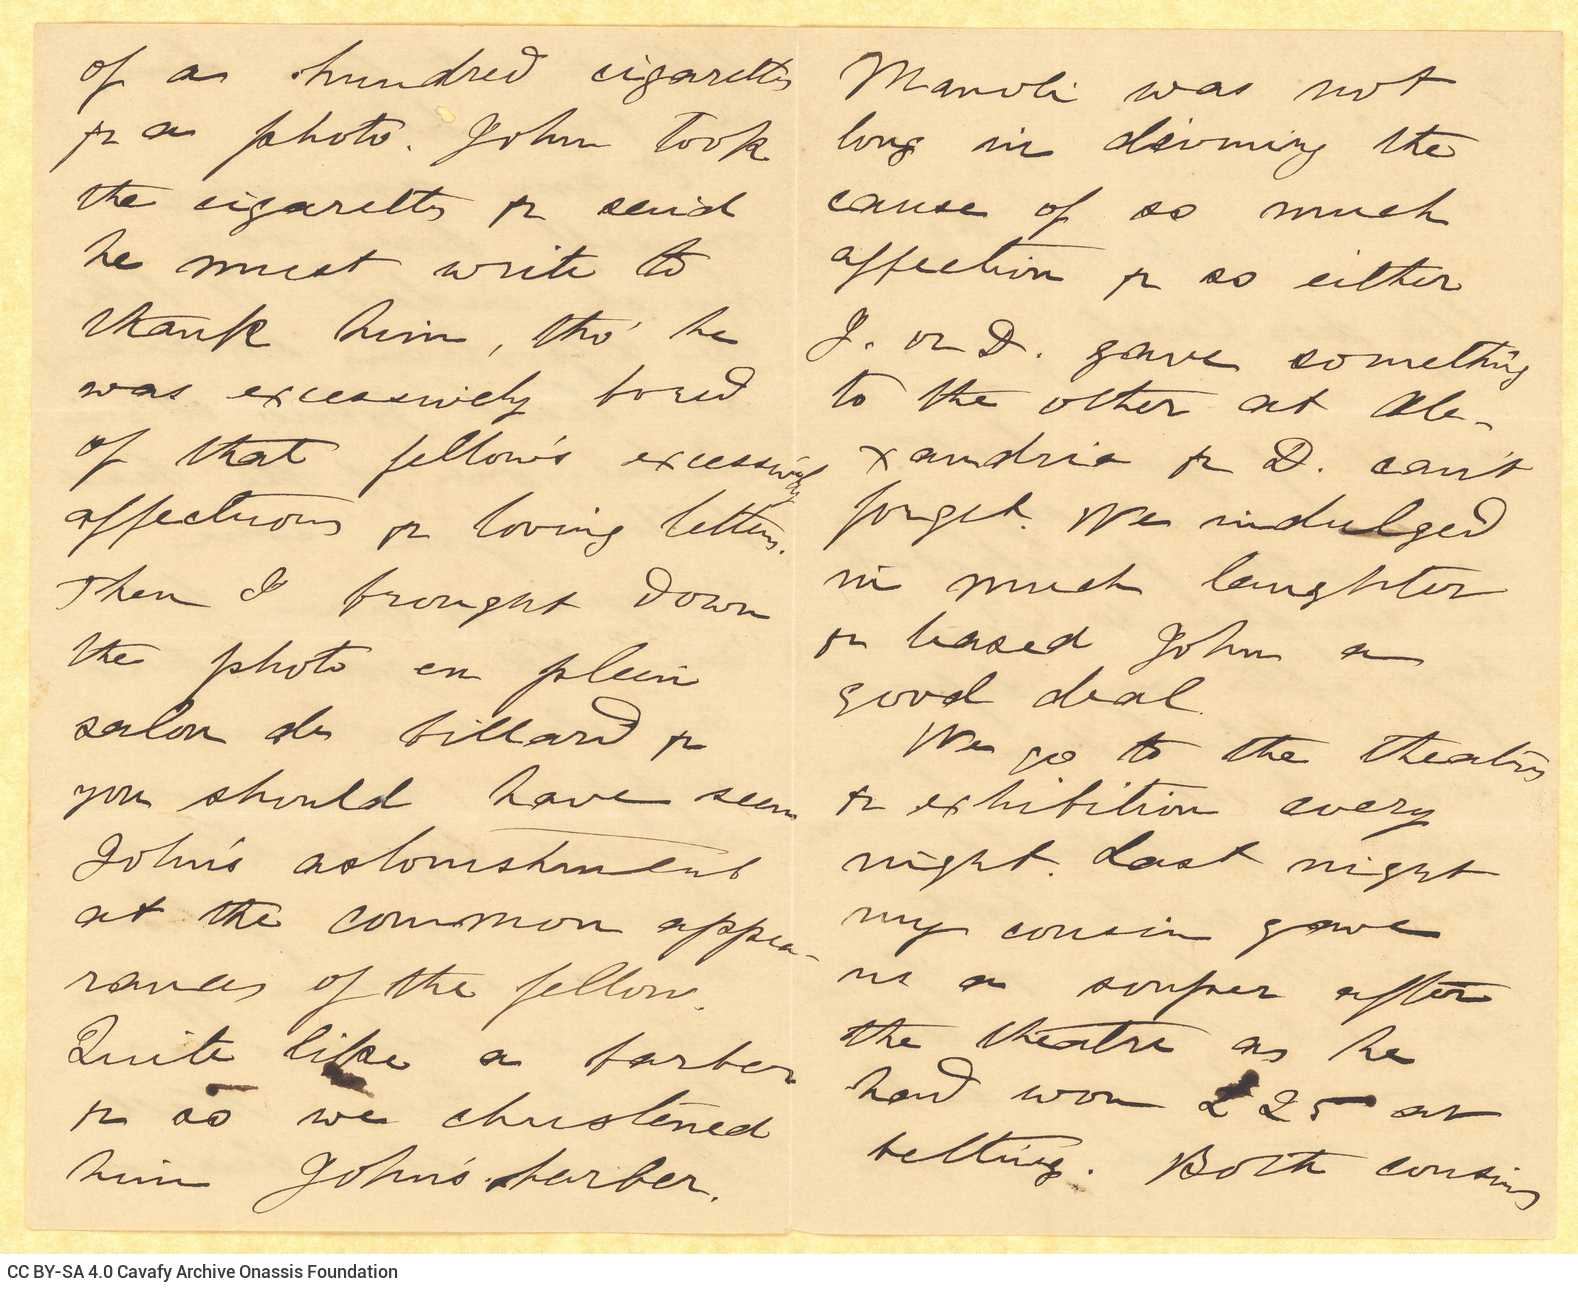 Handwritten letter by Mike Ralli to Cavafy on two bifolios, with notes on all sides. It is a reply to a letter by Cavafy. The